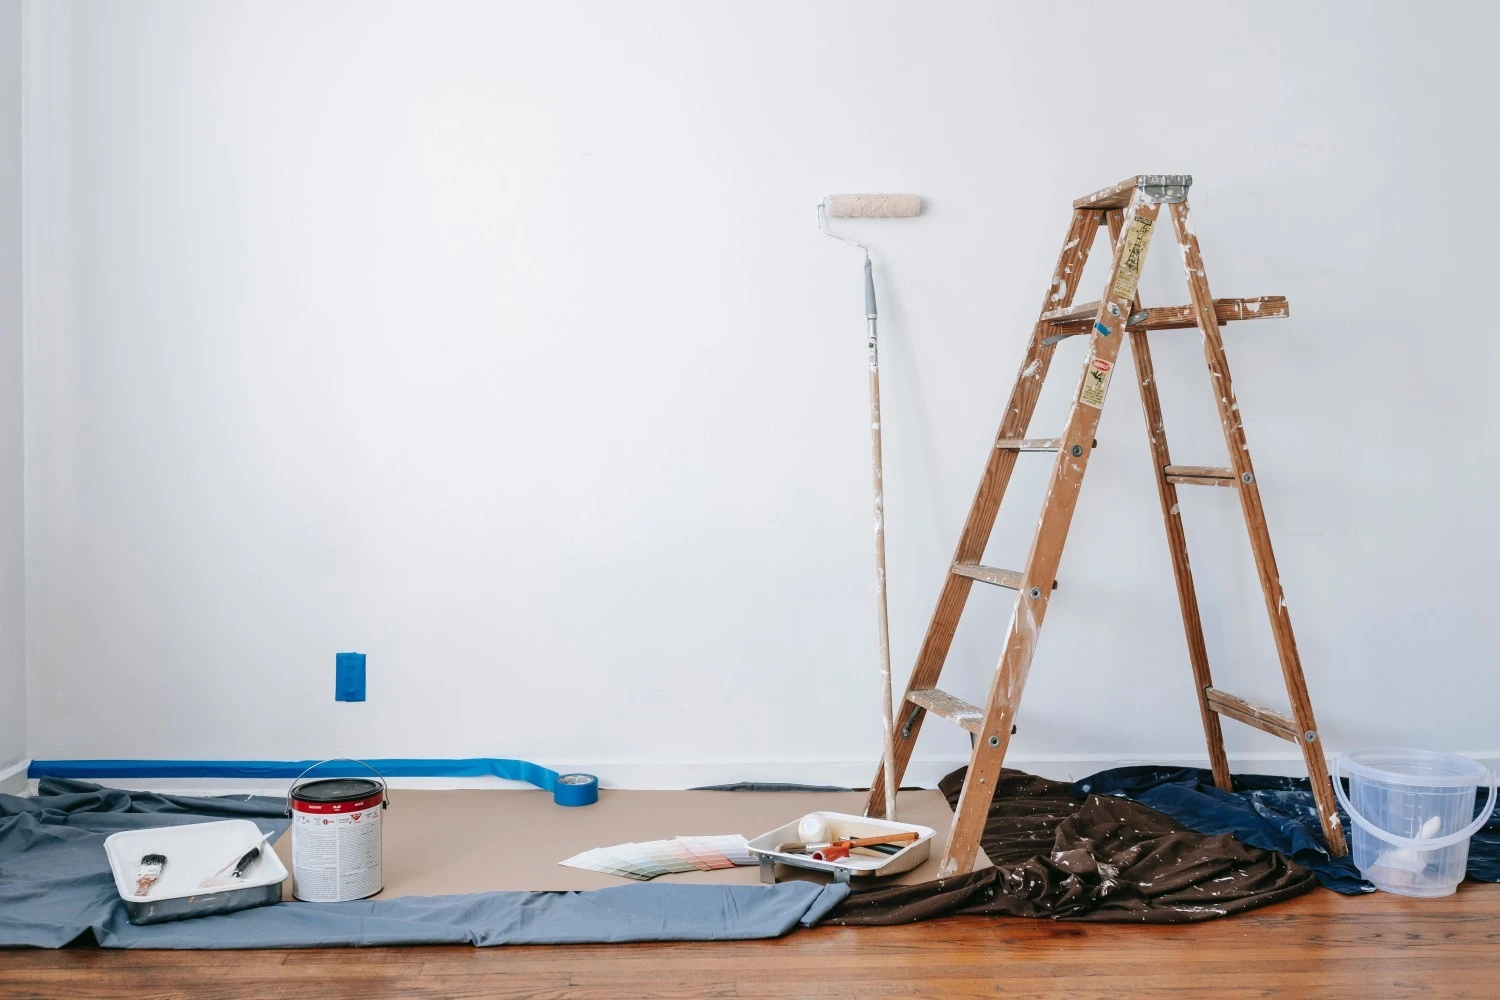 7 Home Improvements to Make Before Moving In